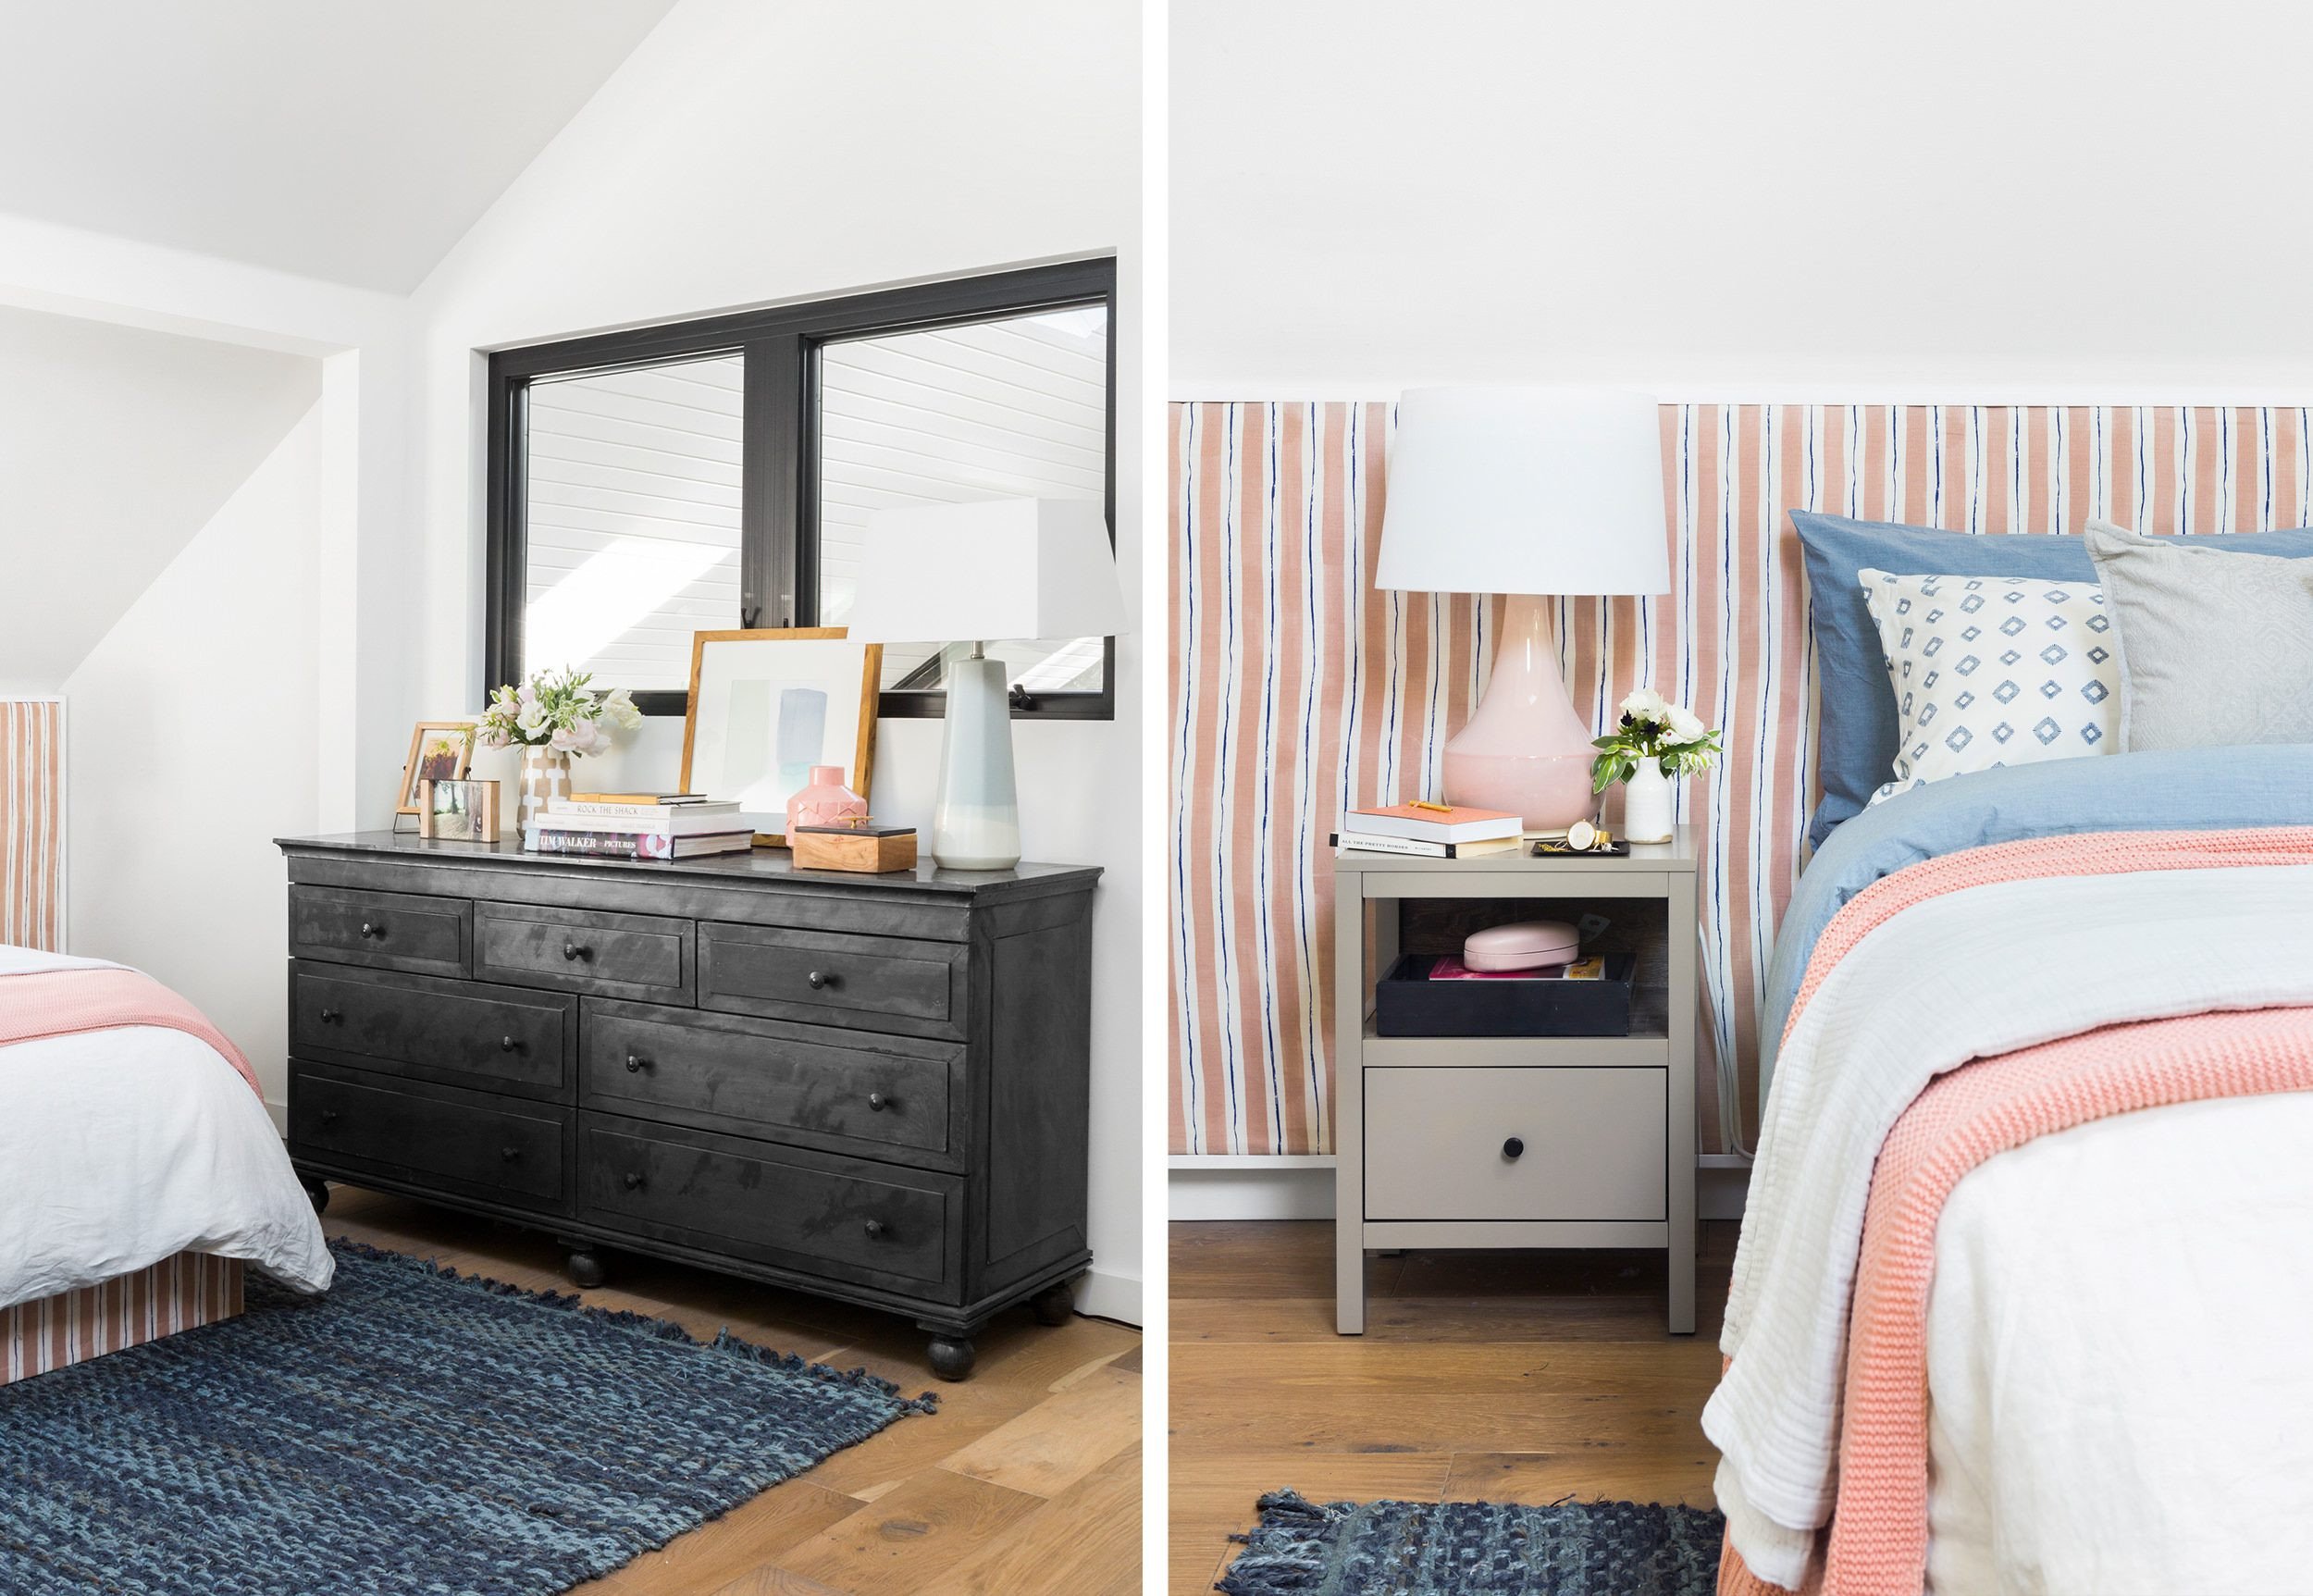 Mix and Match Bedroom Furniture Fresh Power Couples 22 Perfect Dresser &amp; Nightstand Bos for